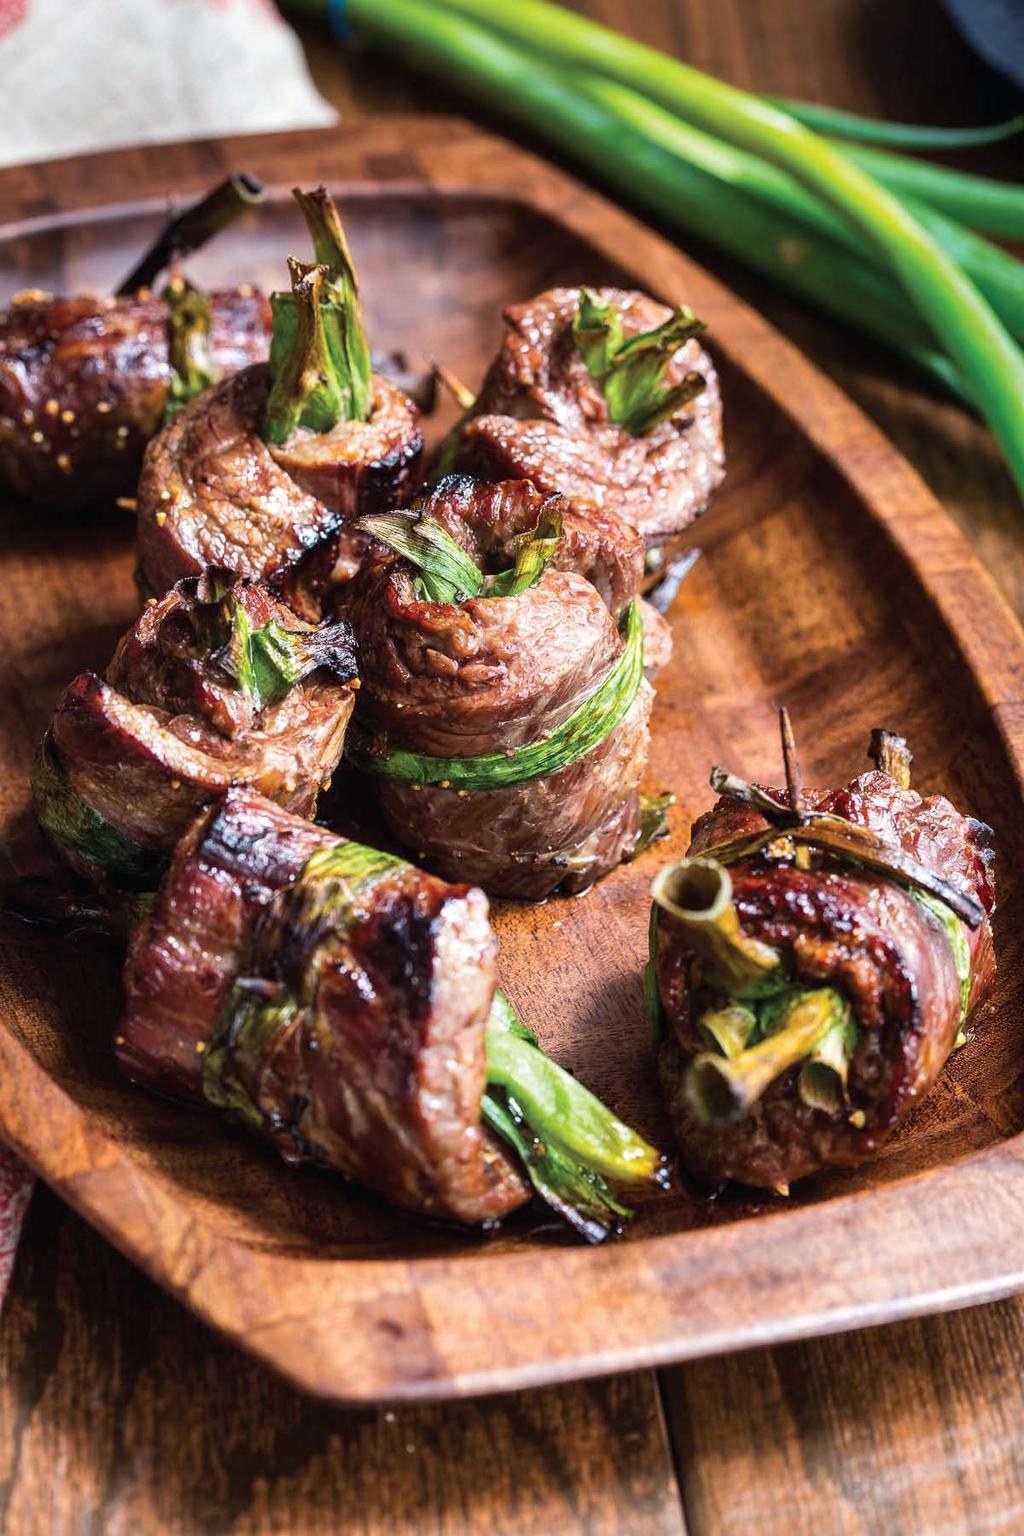 YIELD 2 SERVINGS AS MAIN, 4 AS AN APPETIZER PREP TIME 1 HOUR (INCLUDING MARINATING TIME) COOKING TIME 15 MINUTES TOTAL TIME 1 HOUR 15 MINUTES Fo he eef negimaki 2 POUNDS SKIRT STEAK, EXCESS FAT